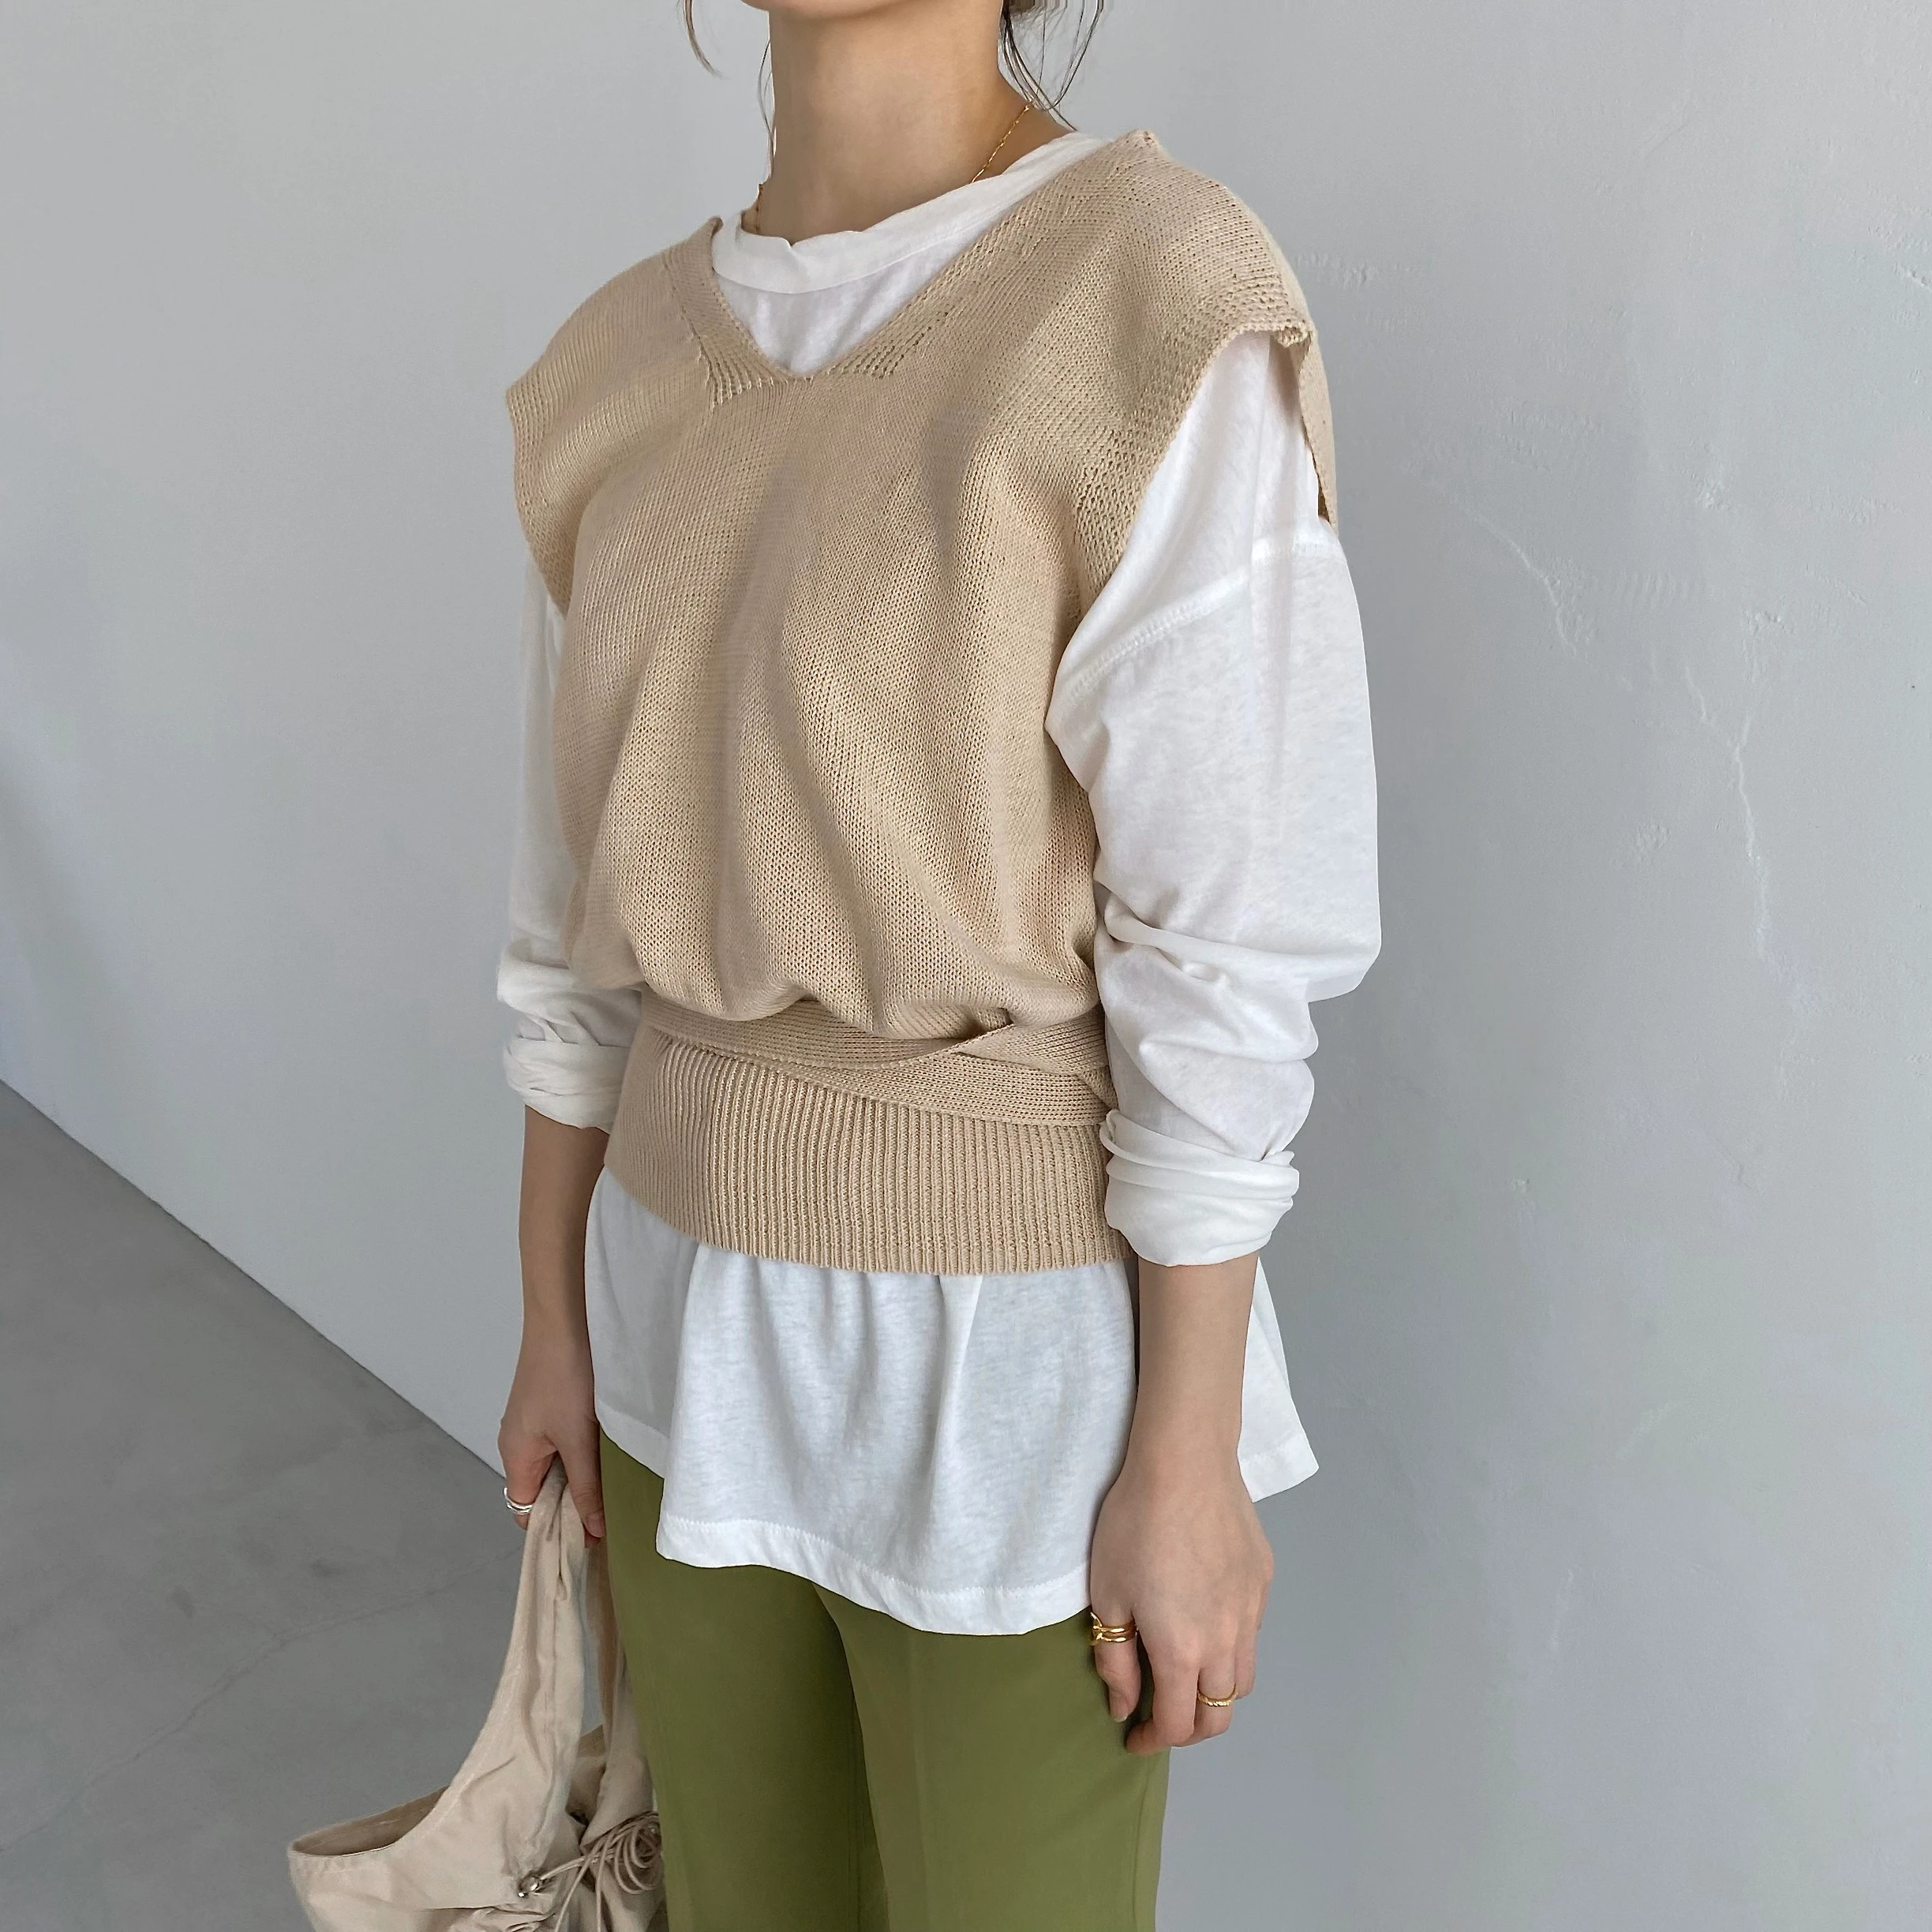 cache-coeur 2way knit summer vest / willfully（ウィルフリー）の 